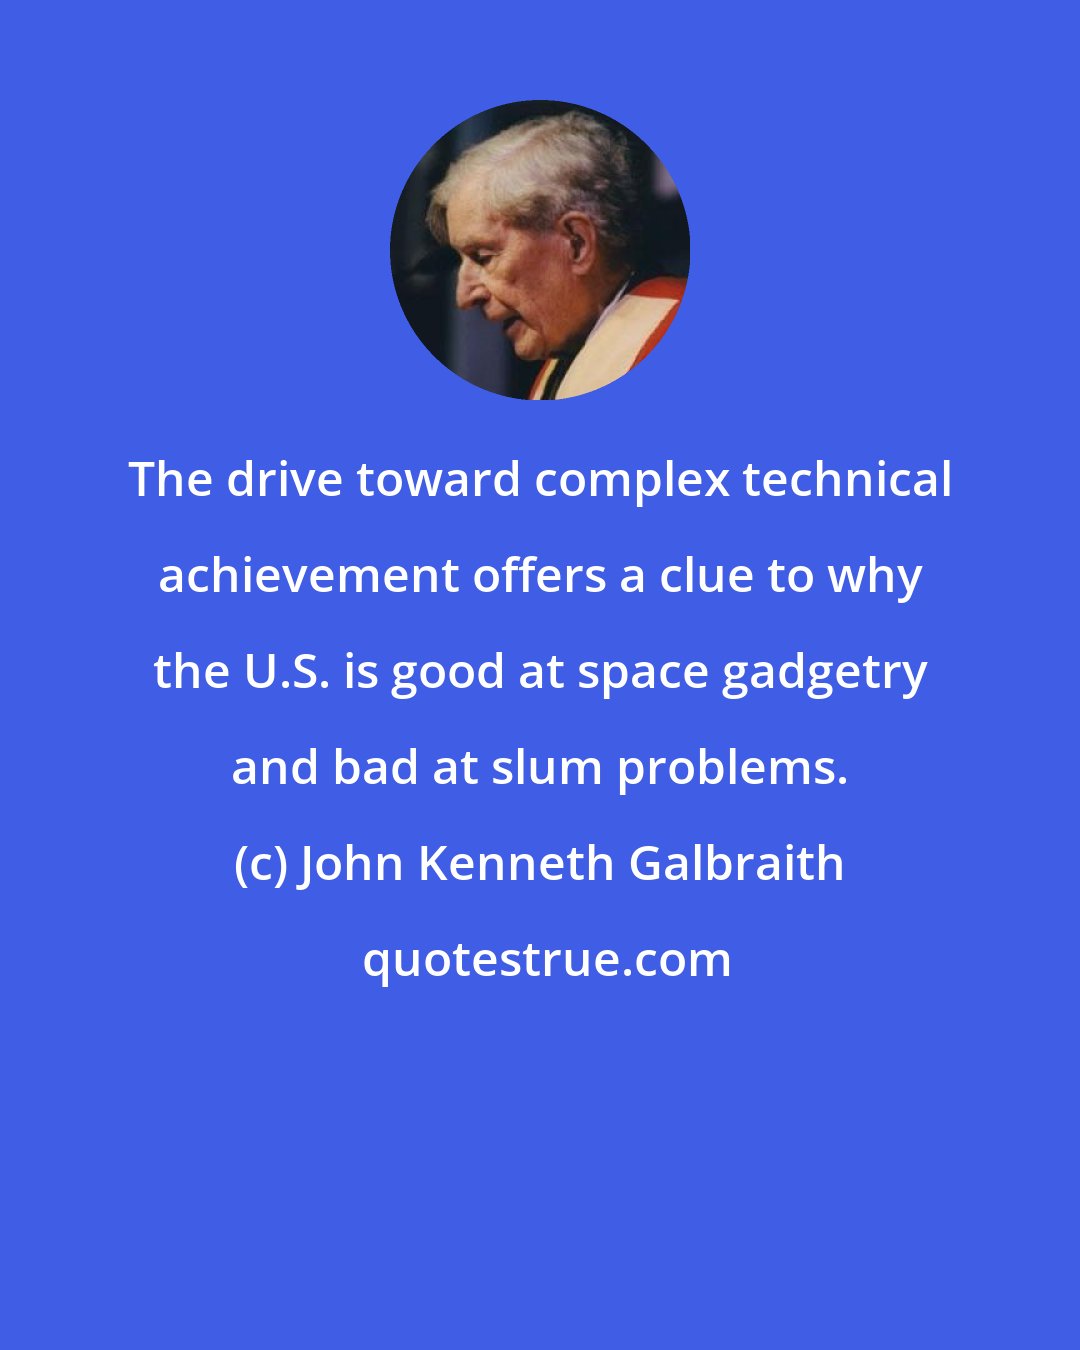 John Kenneth Galbraith: The drive toward complex technical achievement offers a clue to why the U.S. is good at space gadgetry and bad at slum problems.